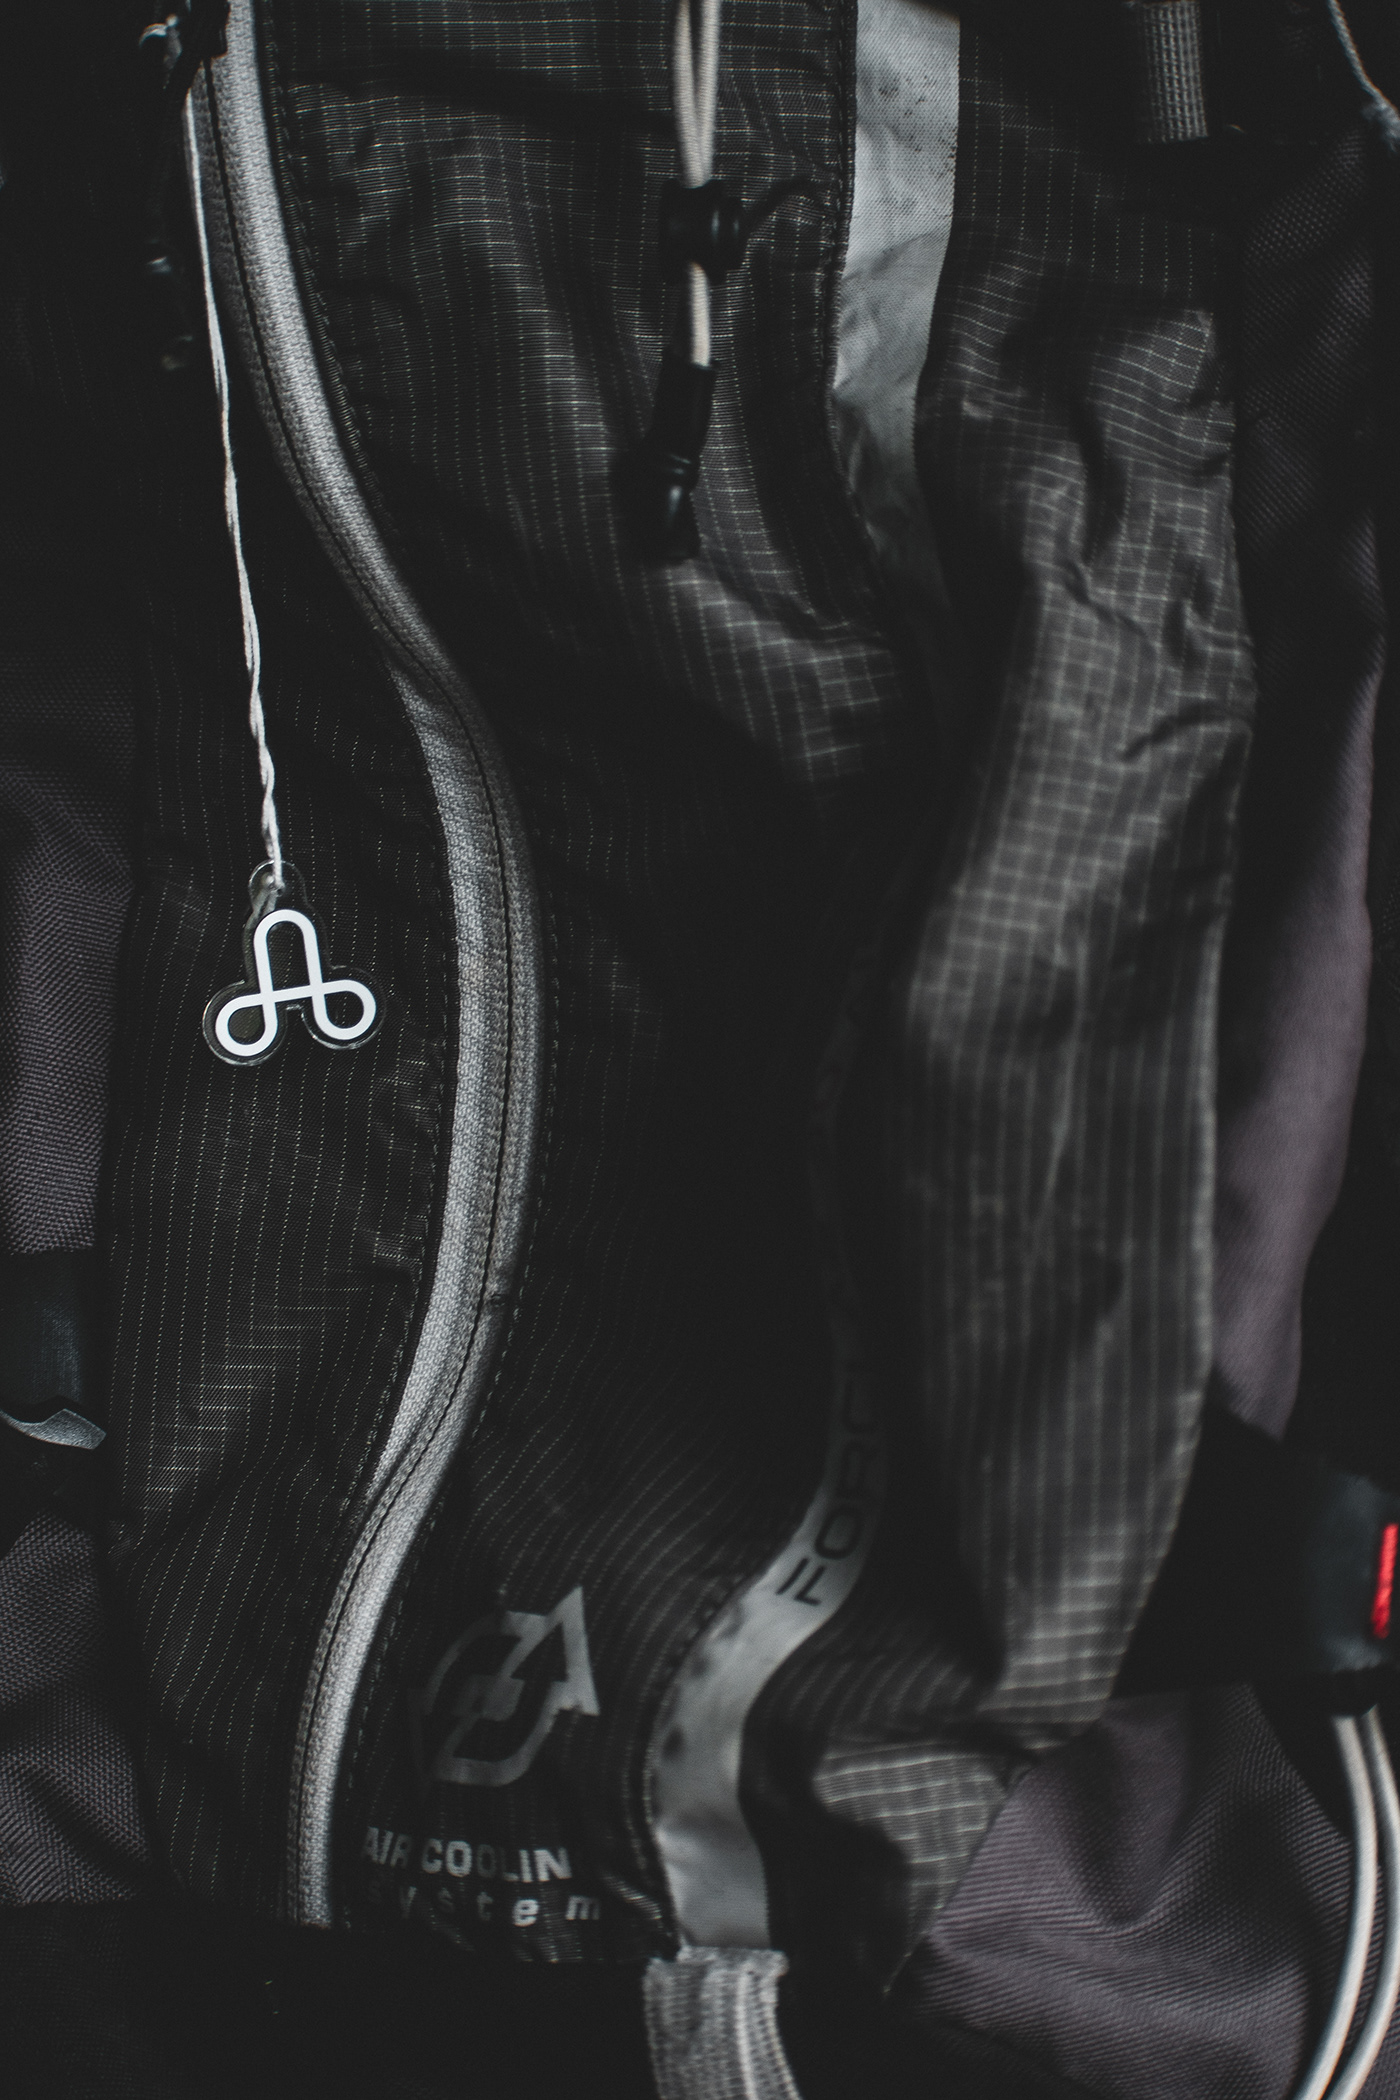 A vertical photograph of the icon for The Uprising hanging on a backpack